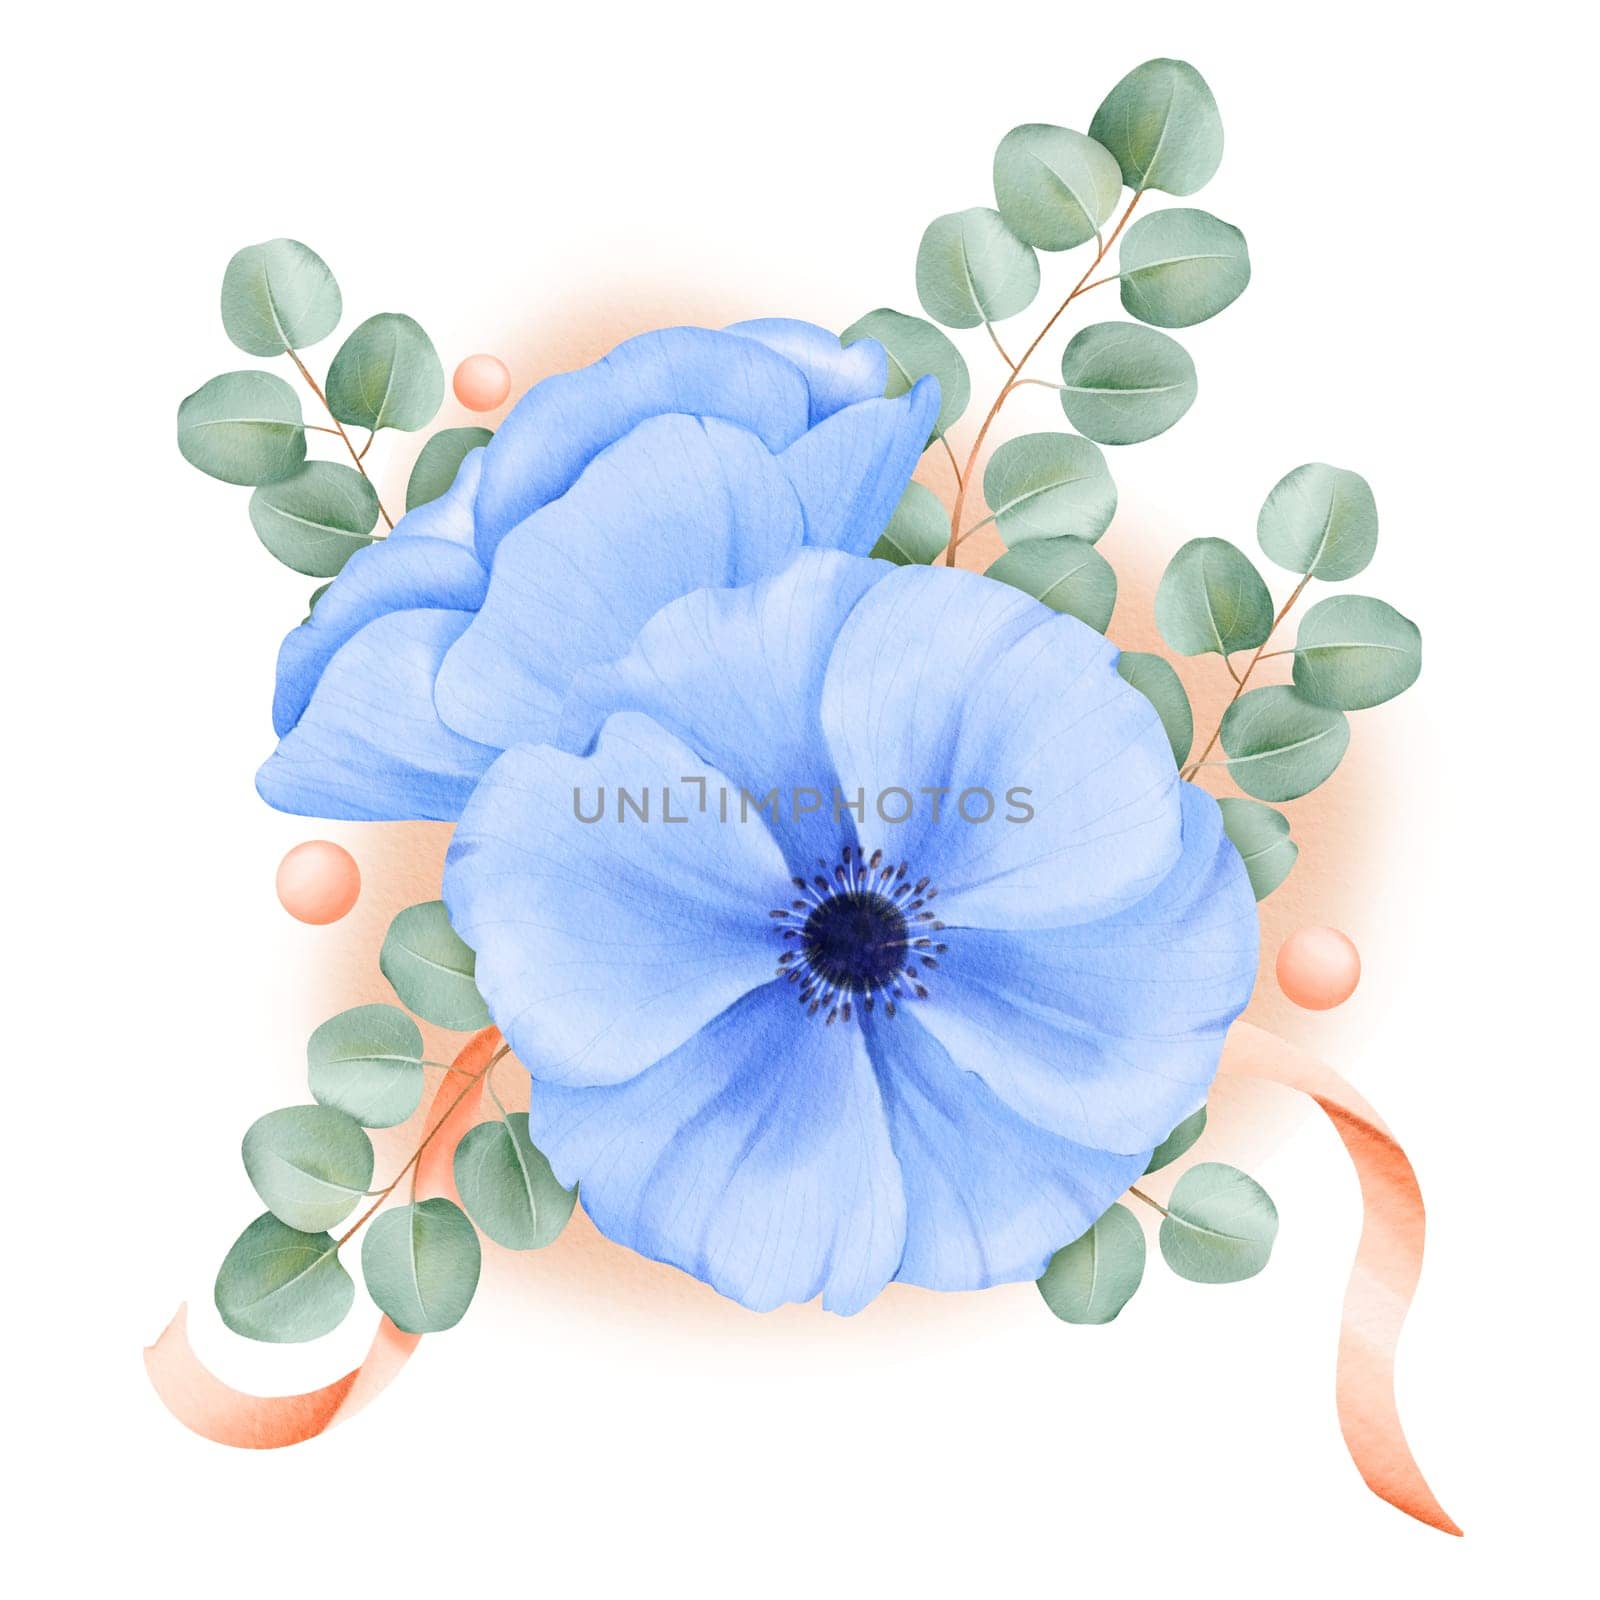 A watercolor arrangement blue anemones and eucalyptus leaves, enhanced with satin ribbons and rhinestones. for elevating wedding invitations, floral branding, digital backgrounds and creative projects by Art_Mari_Ka